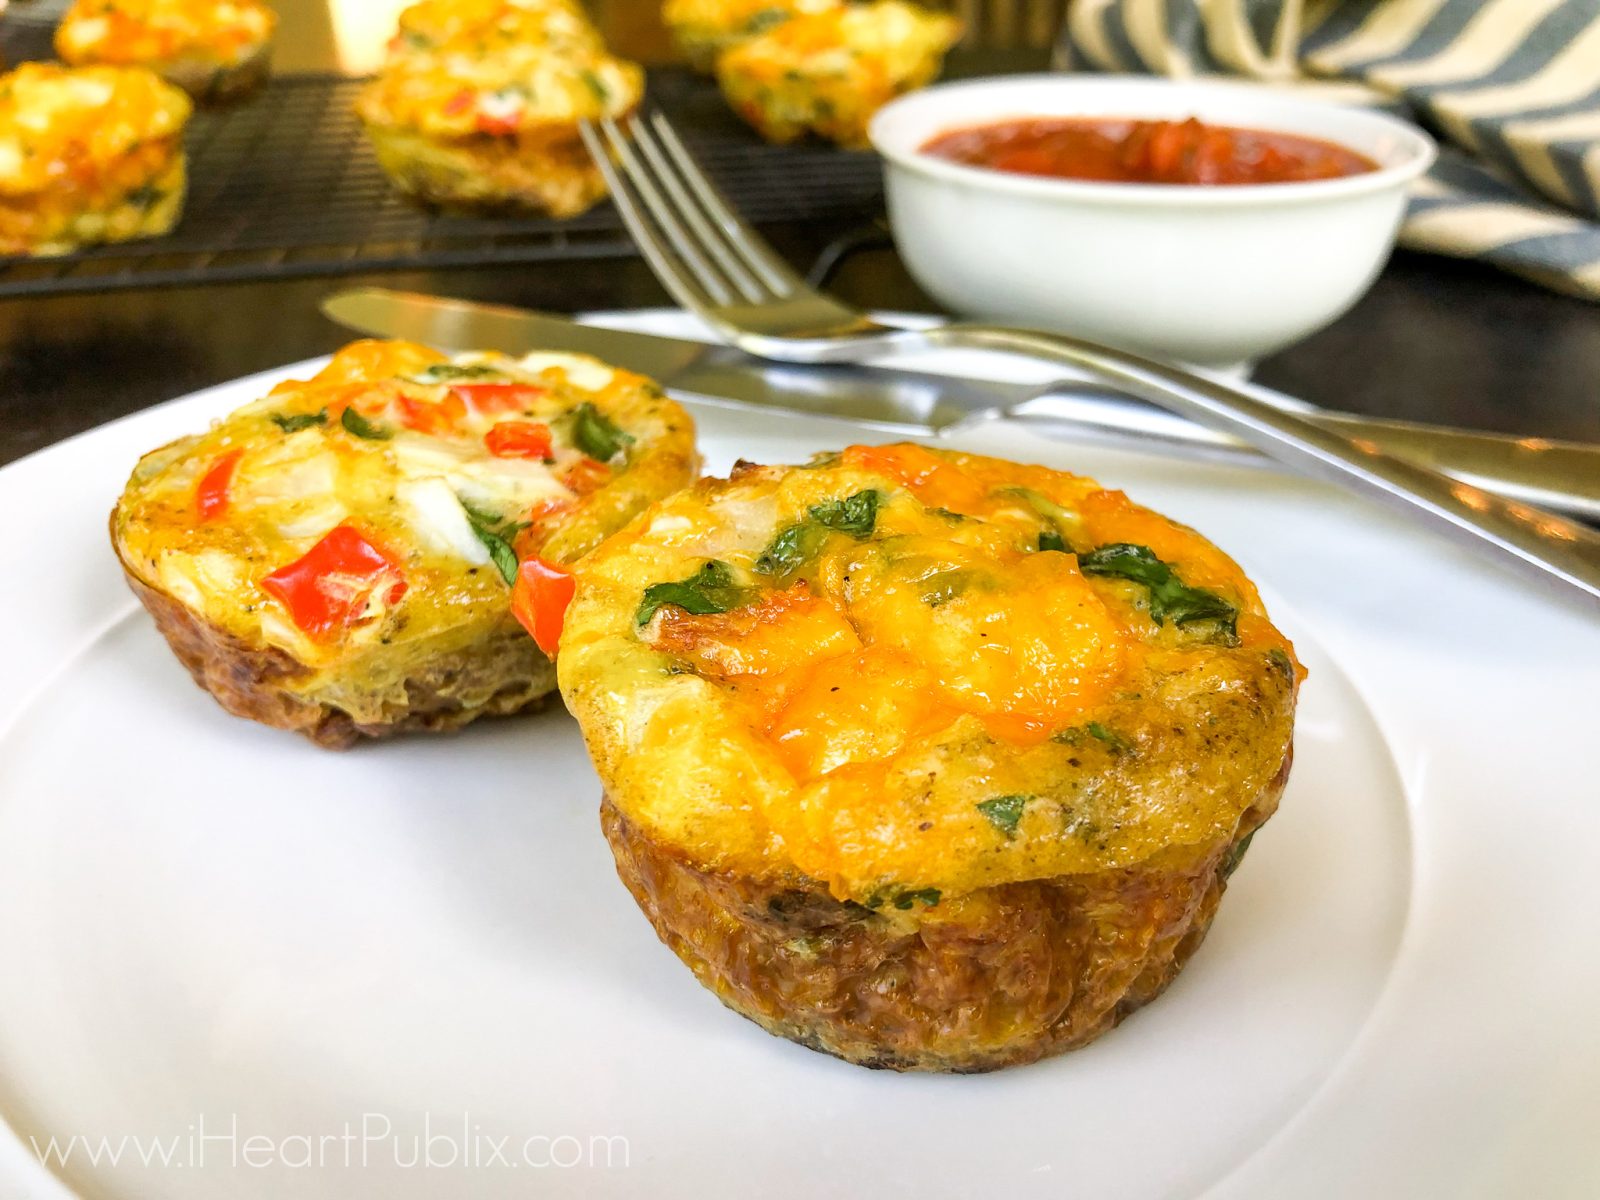 Egg Cups Made With Pure Farmland Breakfast Patties – Clip The Coupon To Save $1.50 At Publix